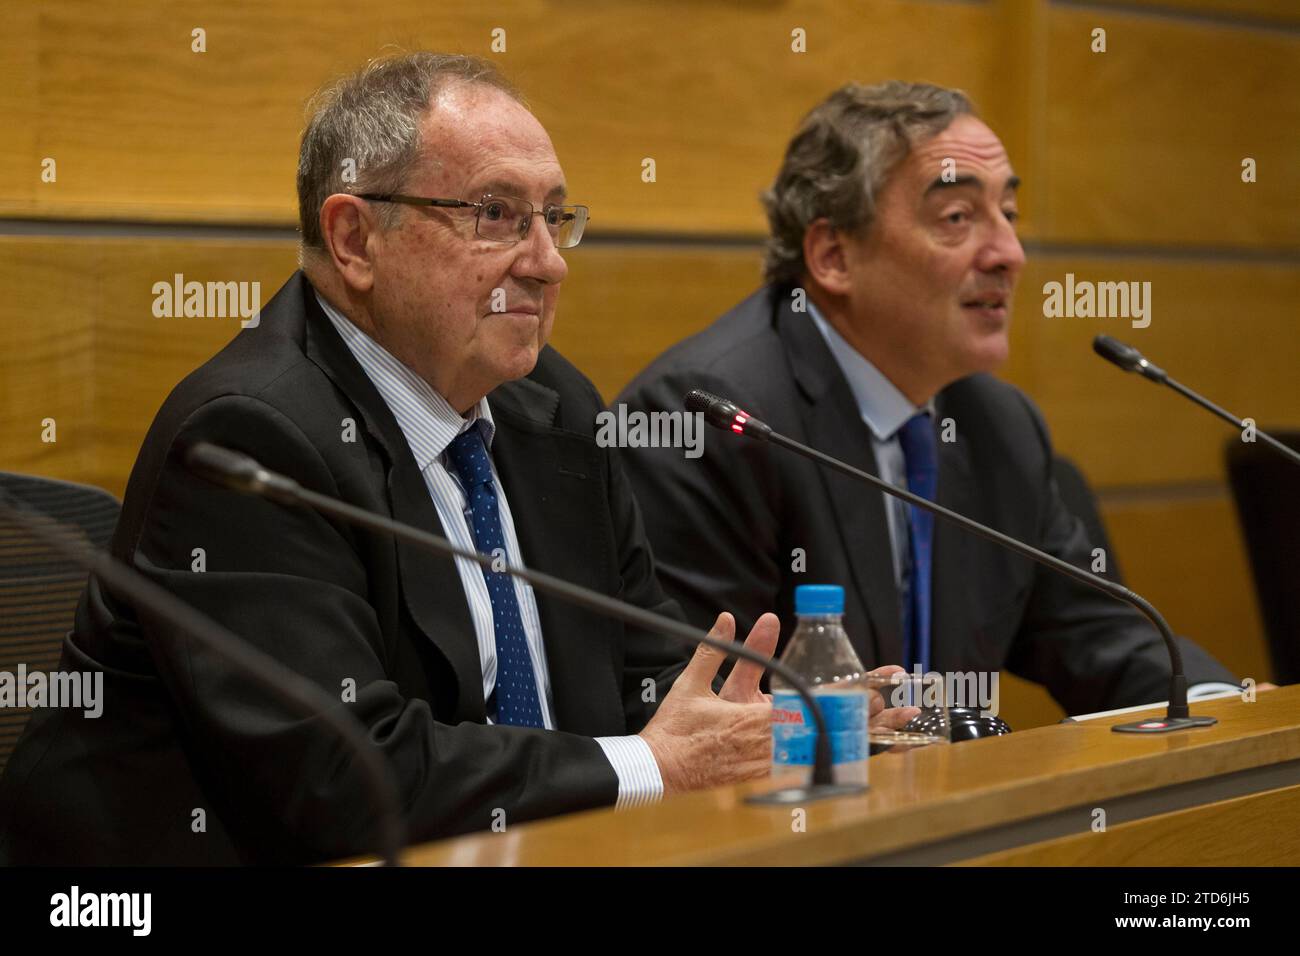 Madrid, 07/07/2015. The president of the Ceoe Joan Rosell and José Luis Bonet at a Press conference. Photo: Isabel Permuy Archdc. Credit: Album / Archivo ABC / Isabel B Permuy Stock Photo